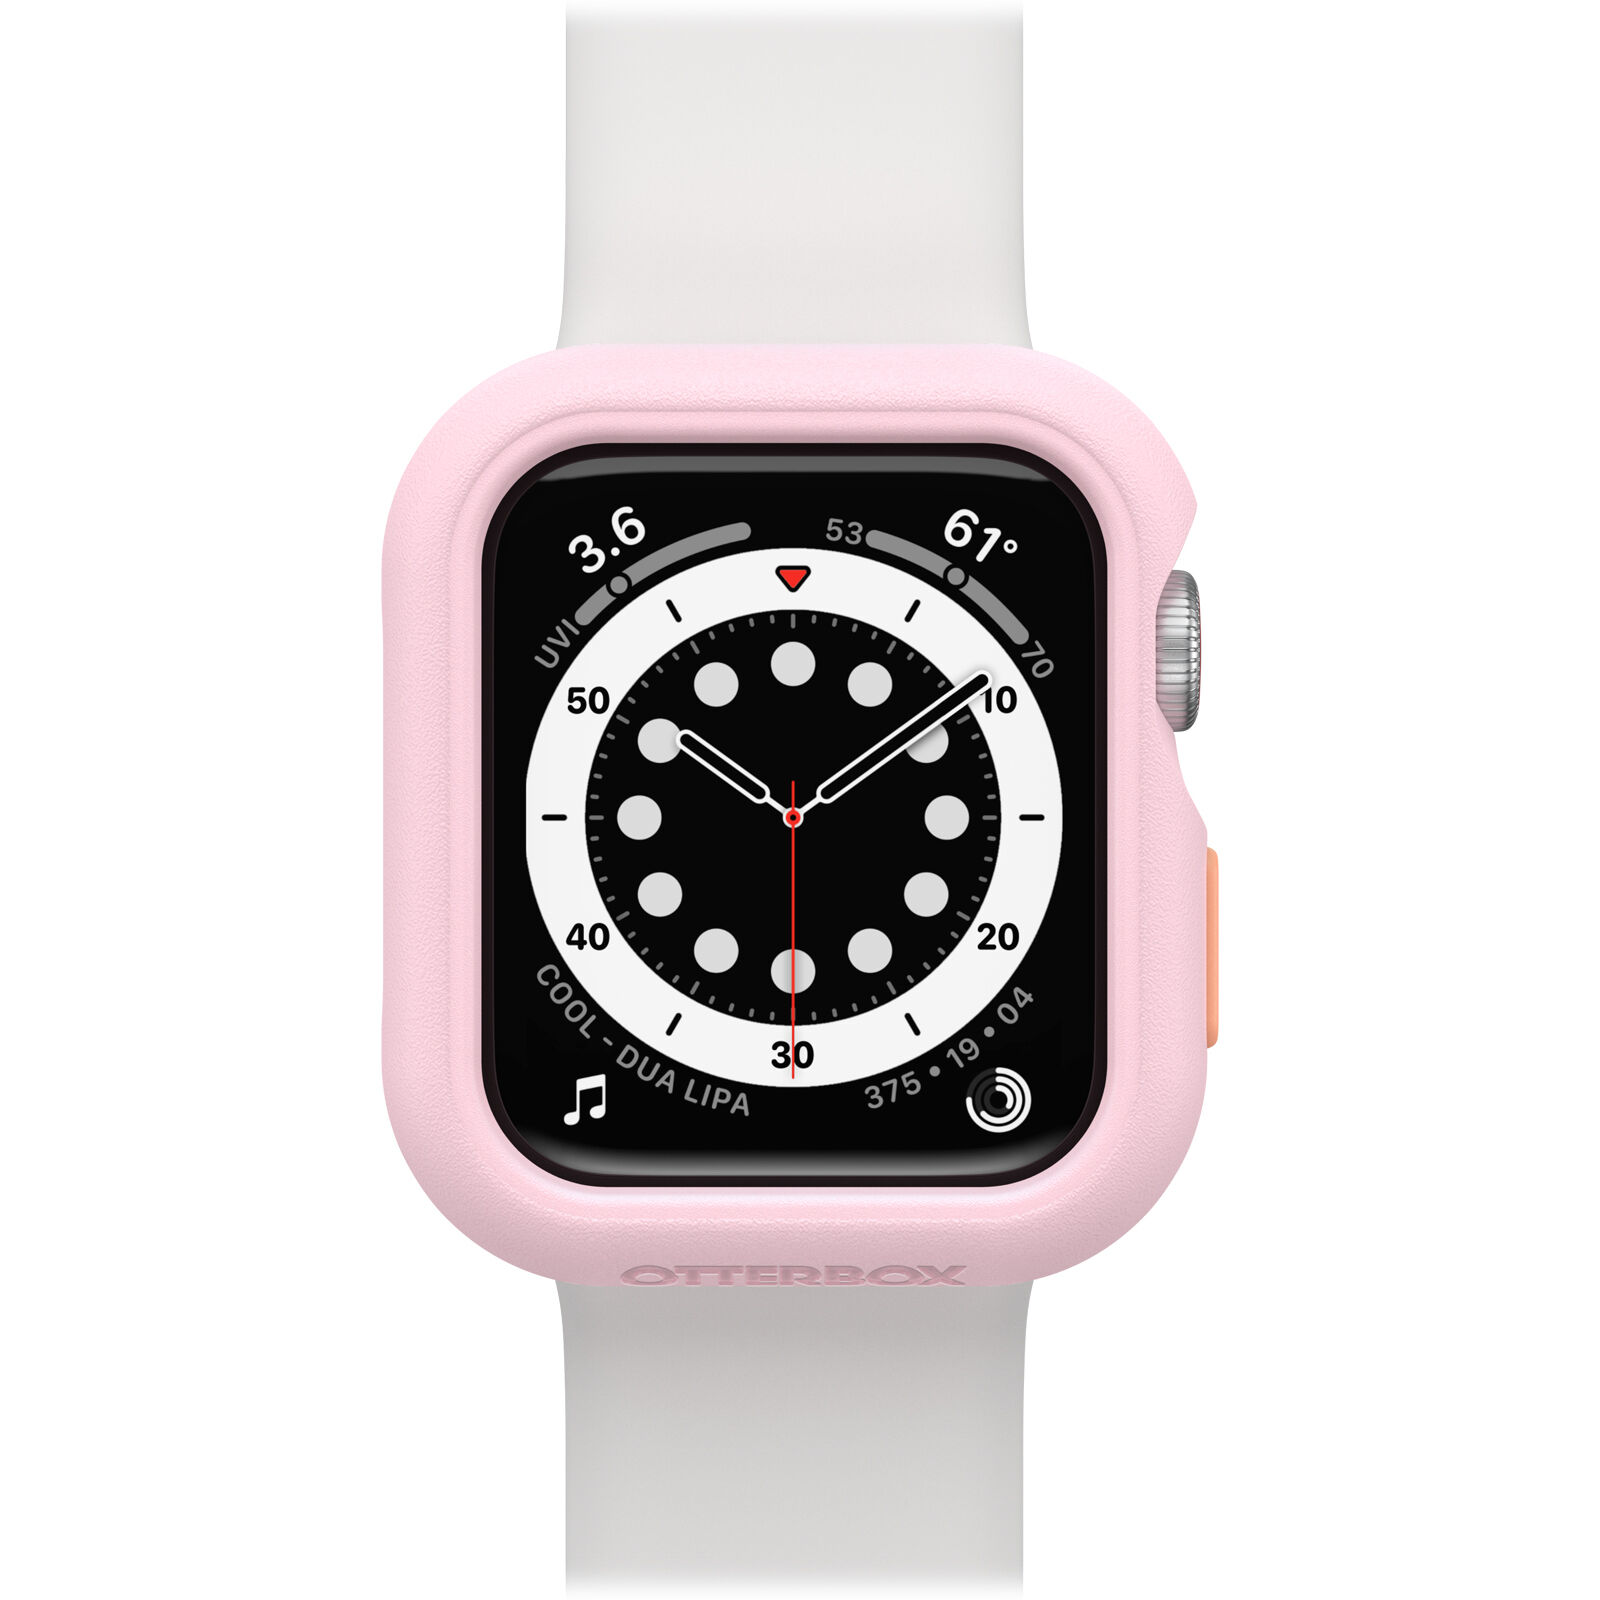 Apple Watch Protective Case | OtterBox Cases for Apple